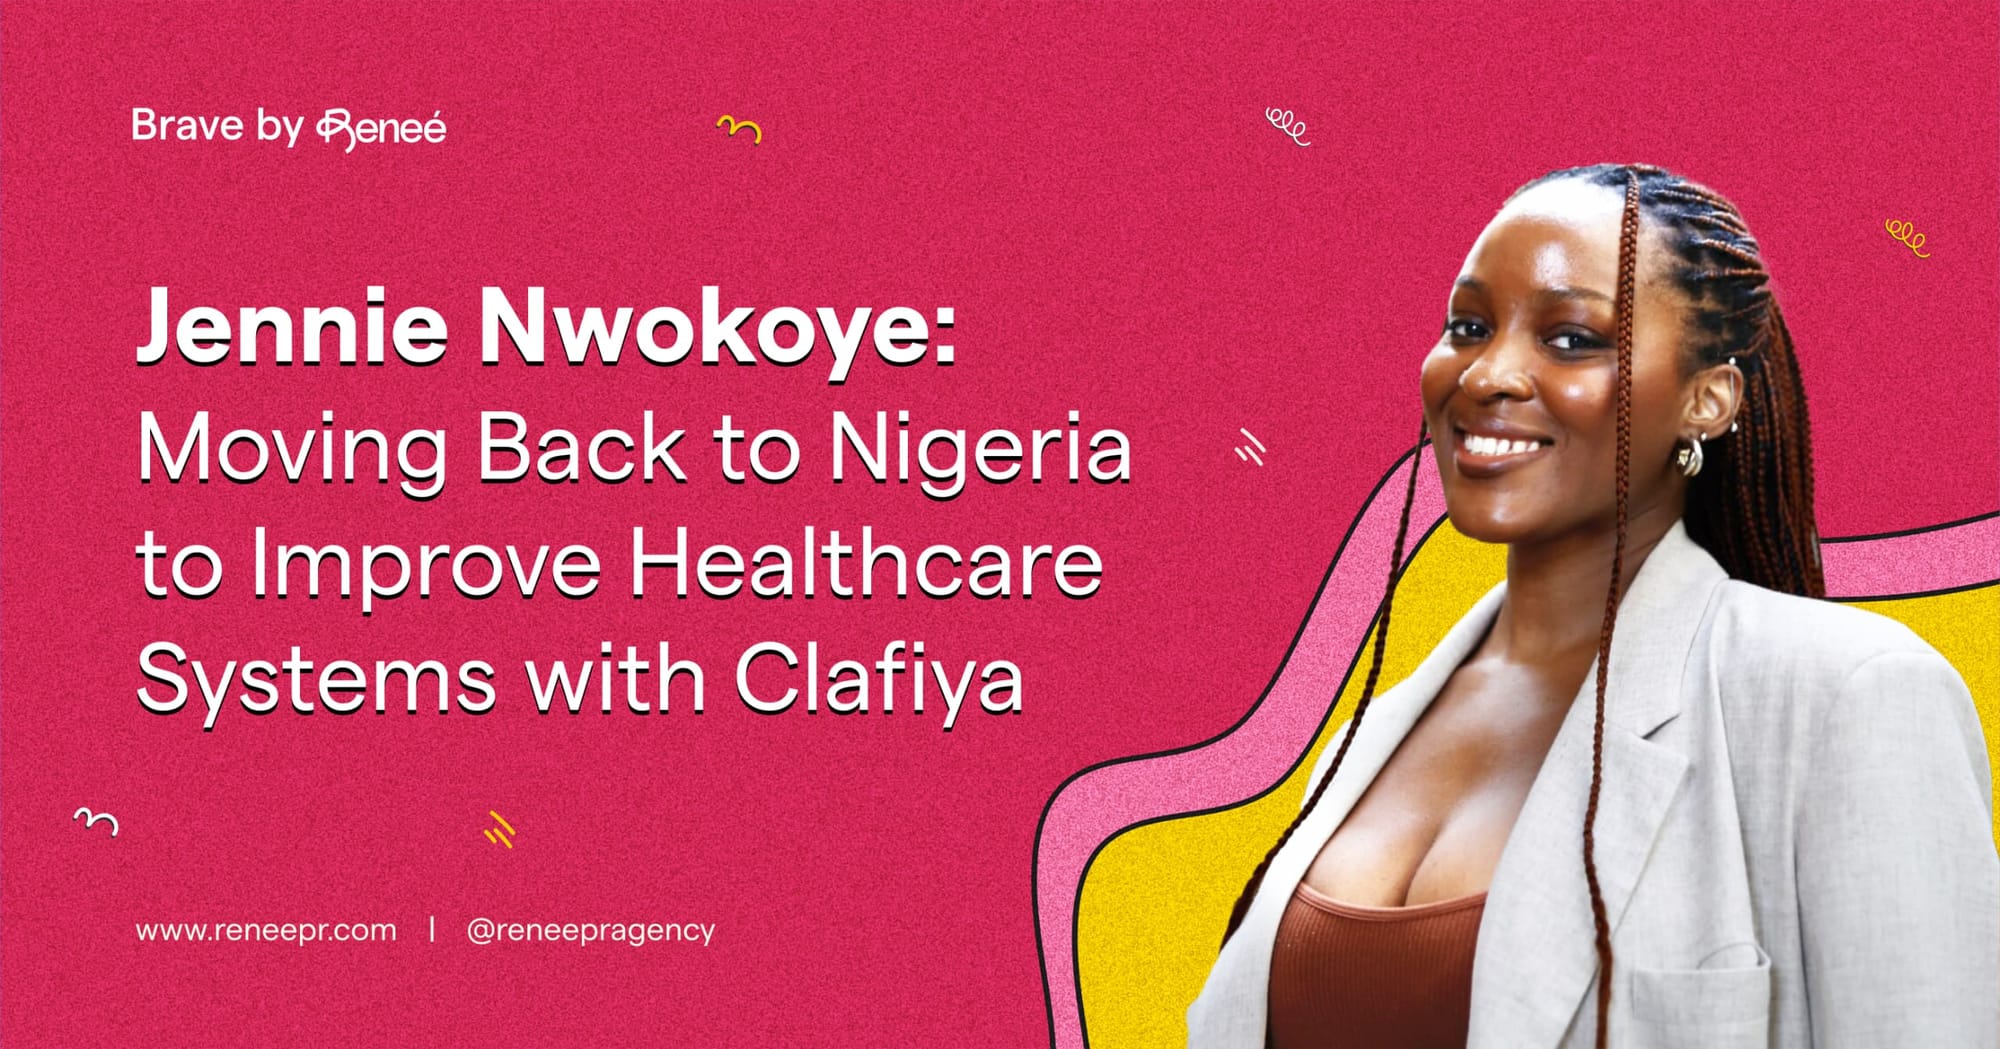 Jennie Nwokoye: Moving Back Home to Improve Healthcare Systems with Clafiya